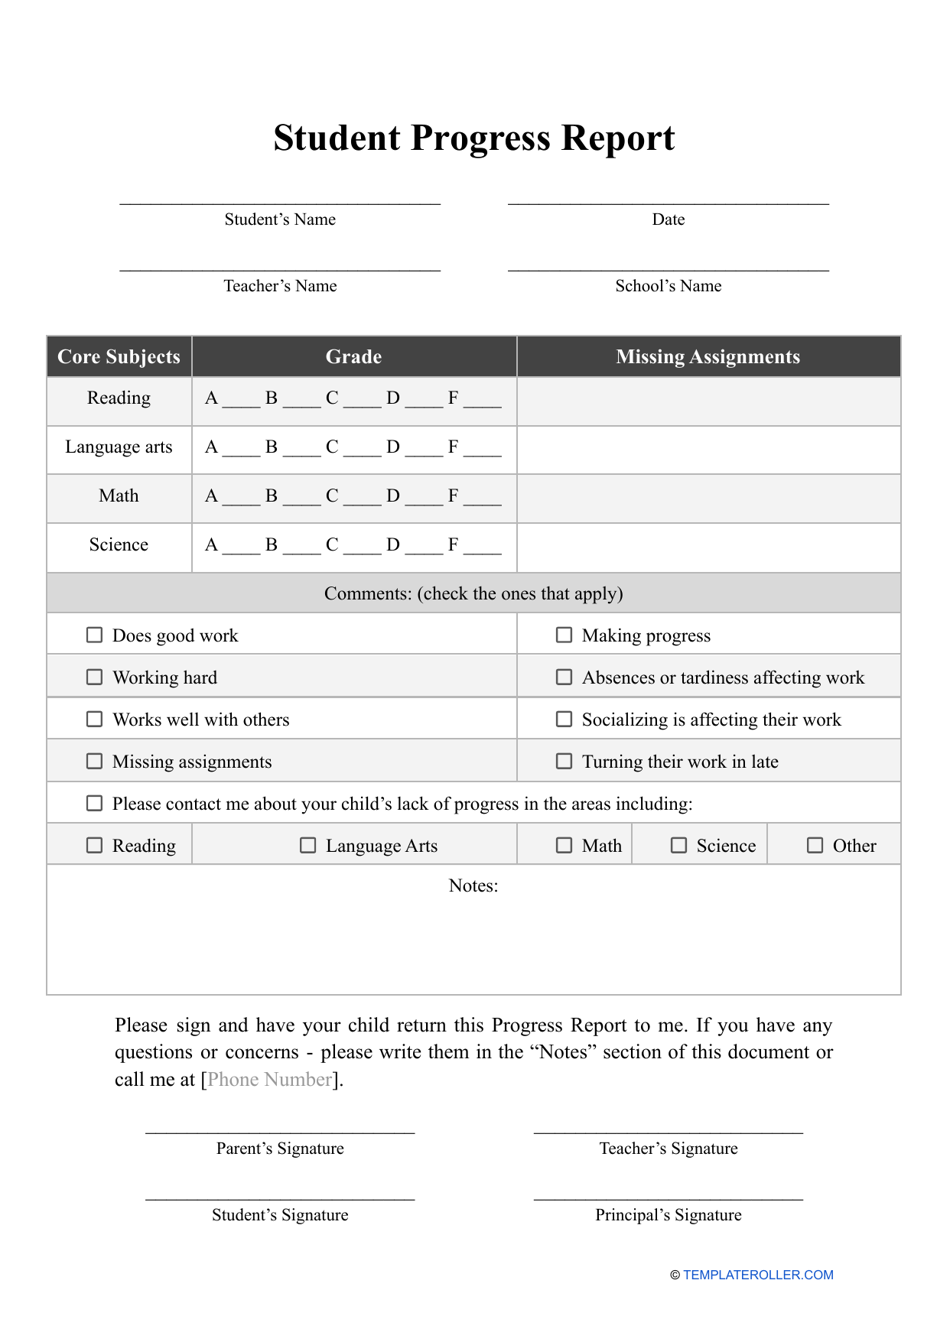 Student Progress Report Template, Page 1